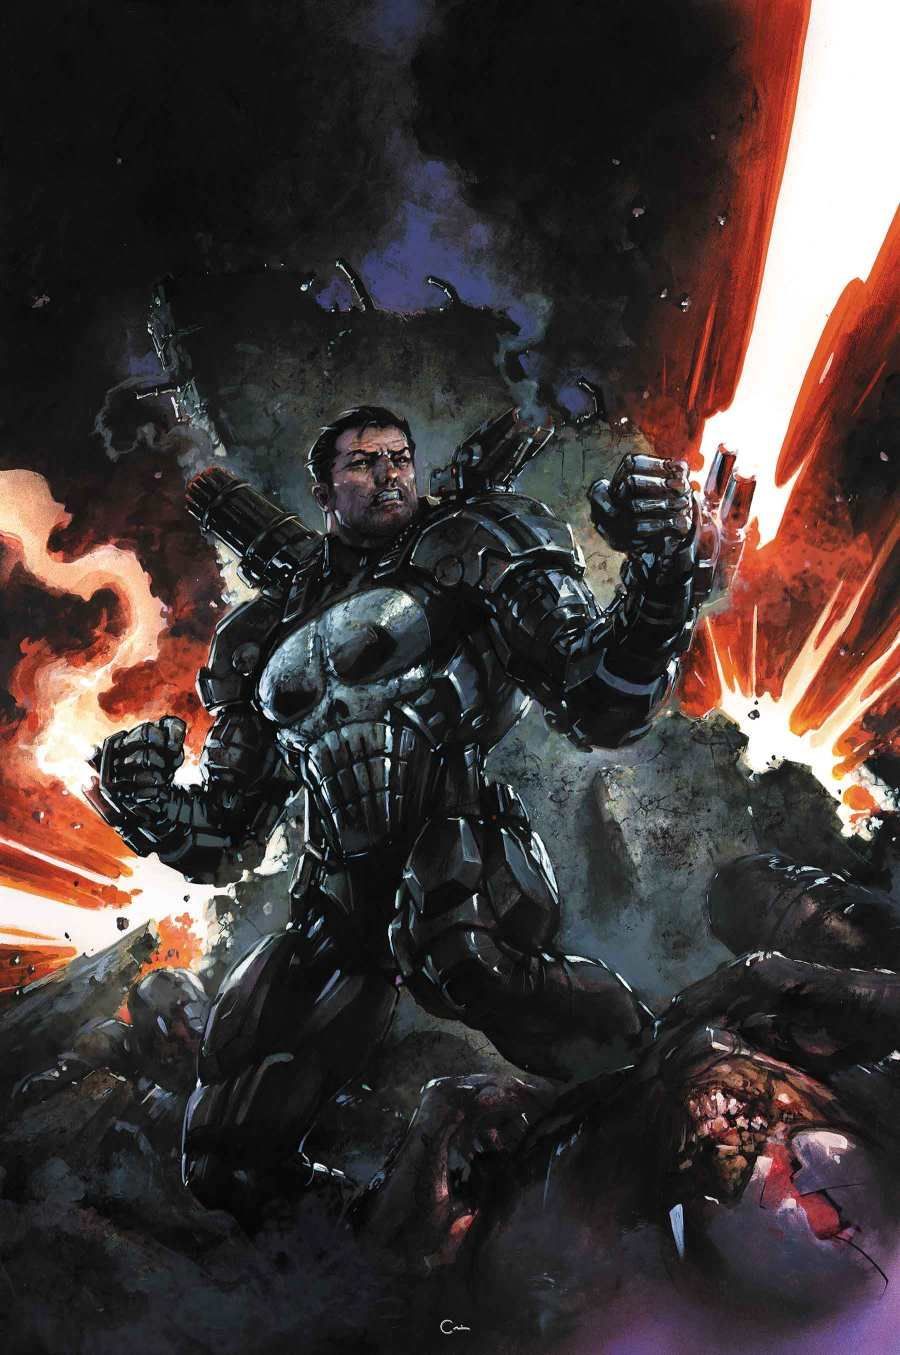 New Details On The Punisher Becoming War Machine. Punisher marvel, Punisher art, Punisher artwork